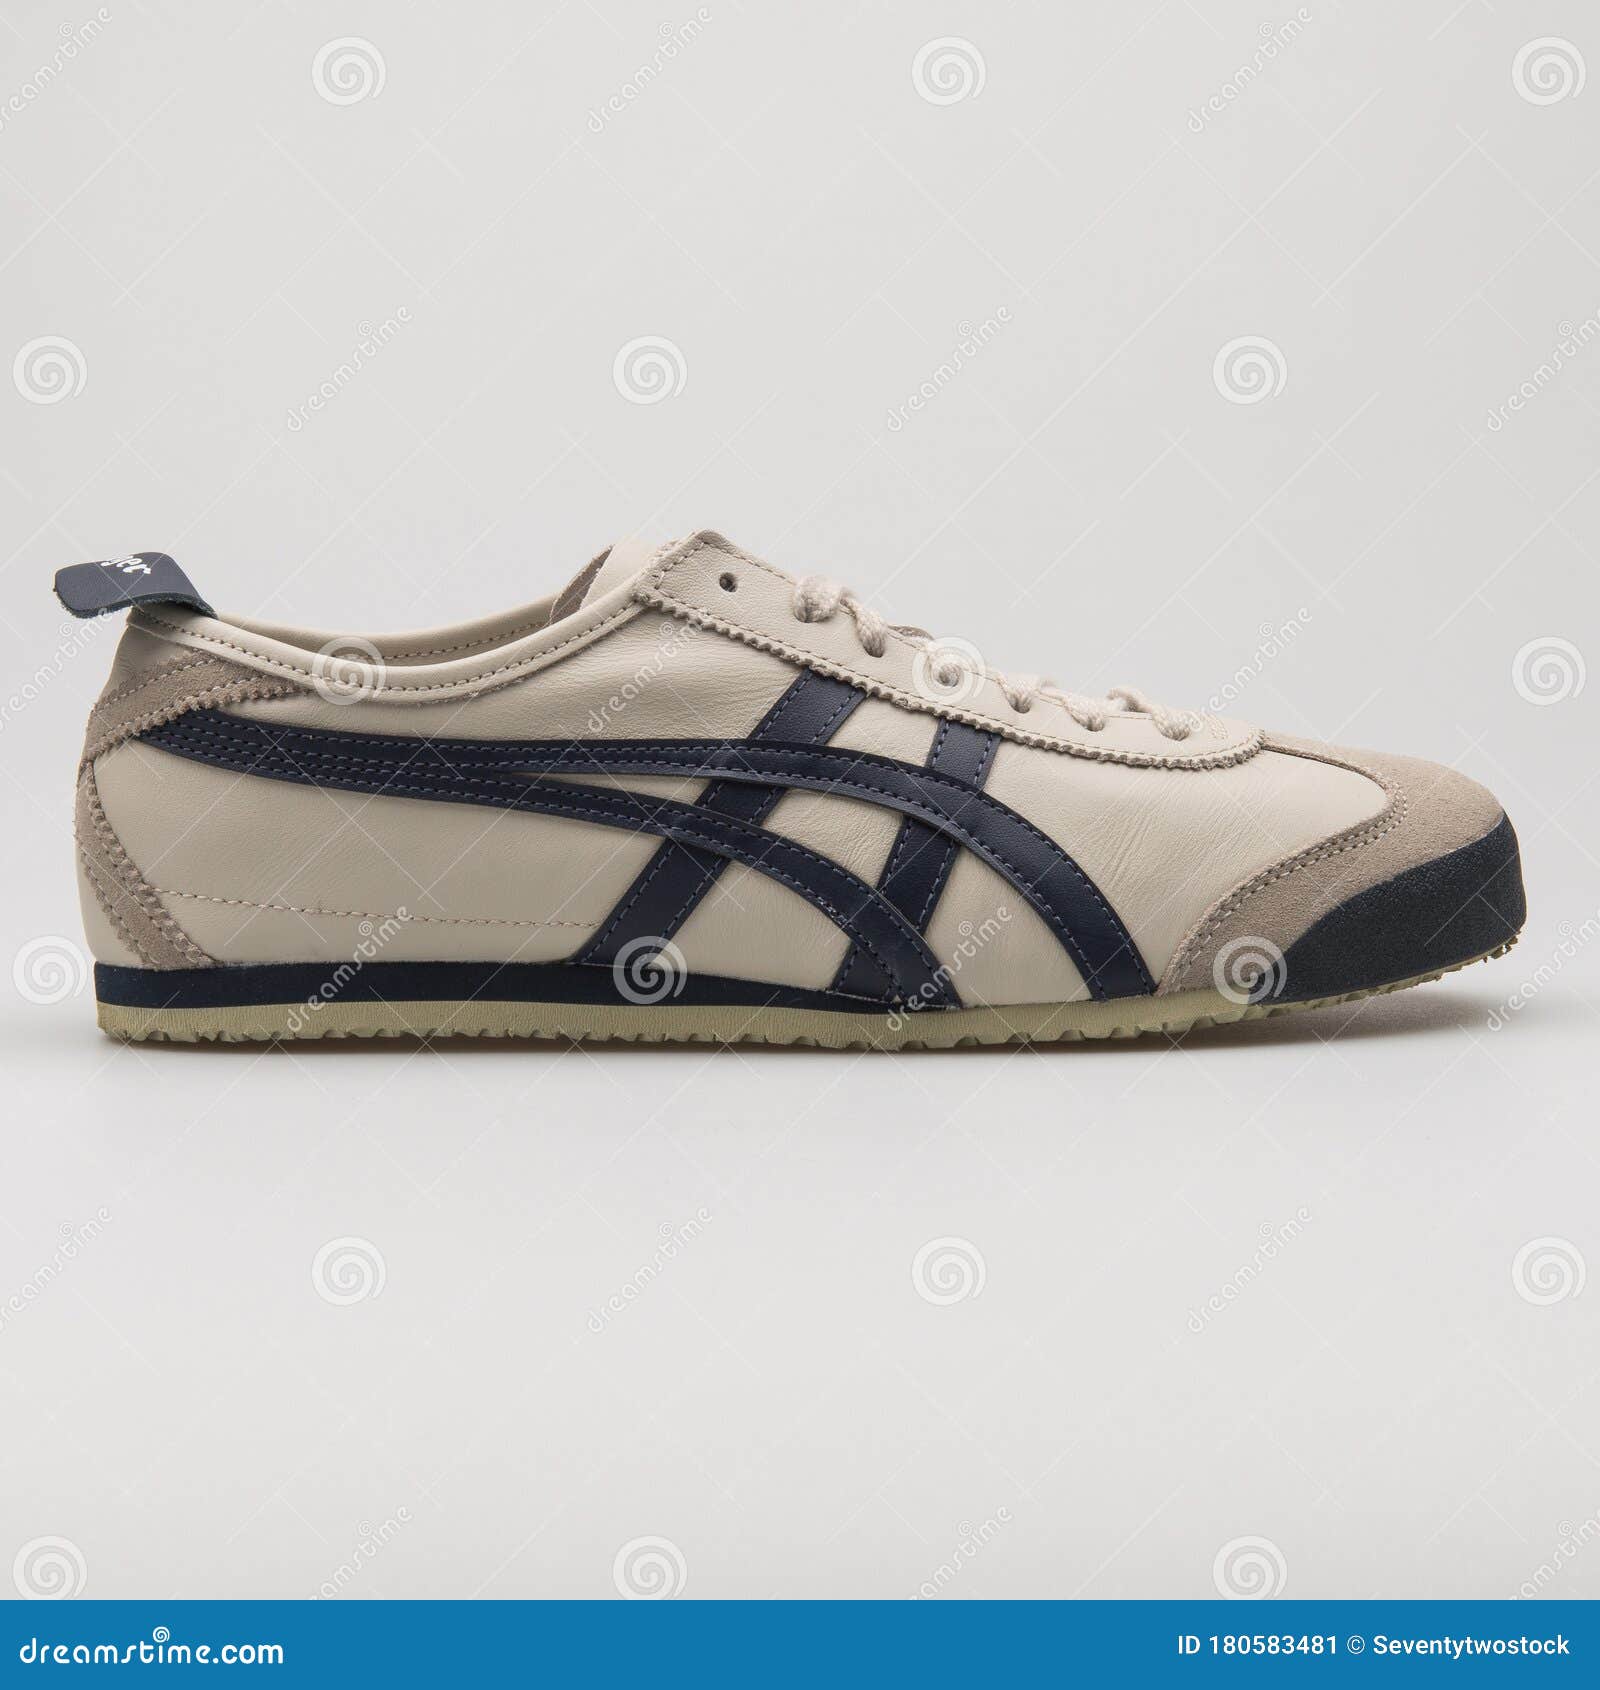 Onitsuka Tiger Mexico 66 Beige and Navy Blue Sneaker Editorial Photo ...